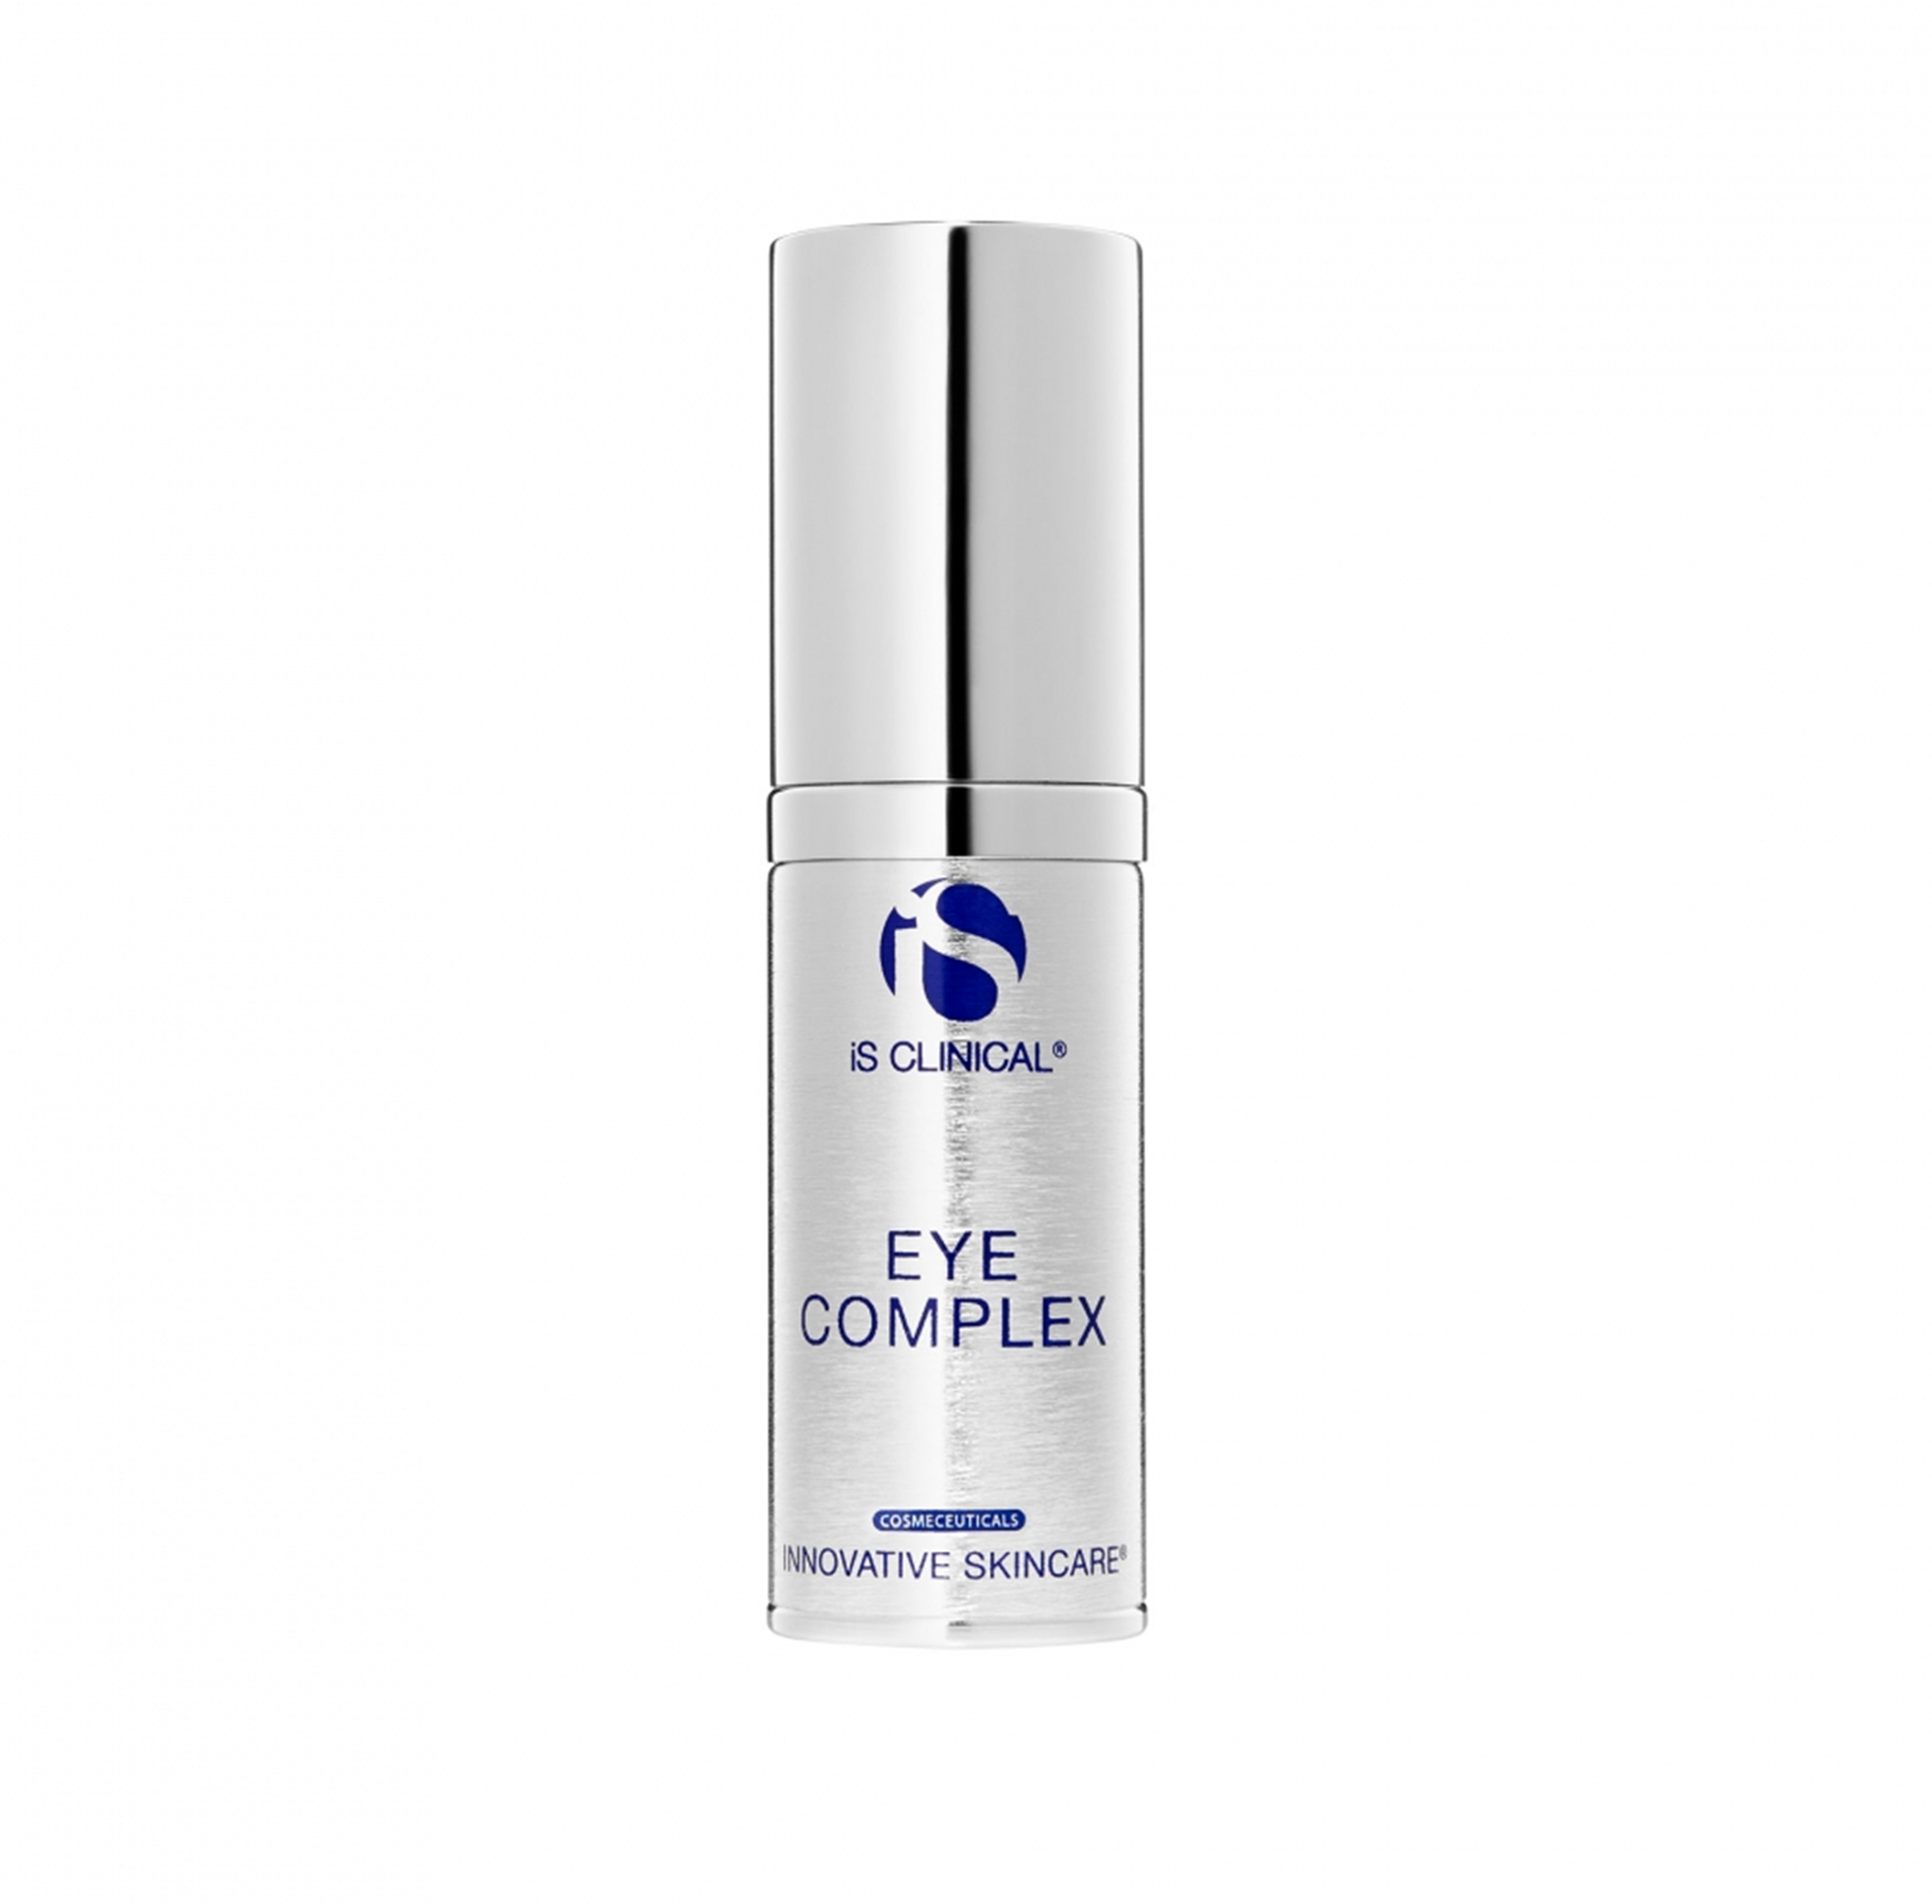 Village Wellness Spa - iS Clinical Eye Complex - Full Size 15g